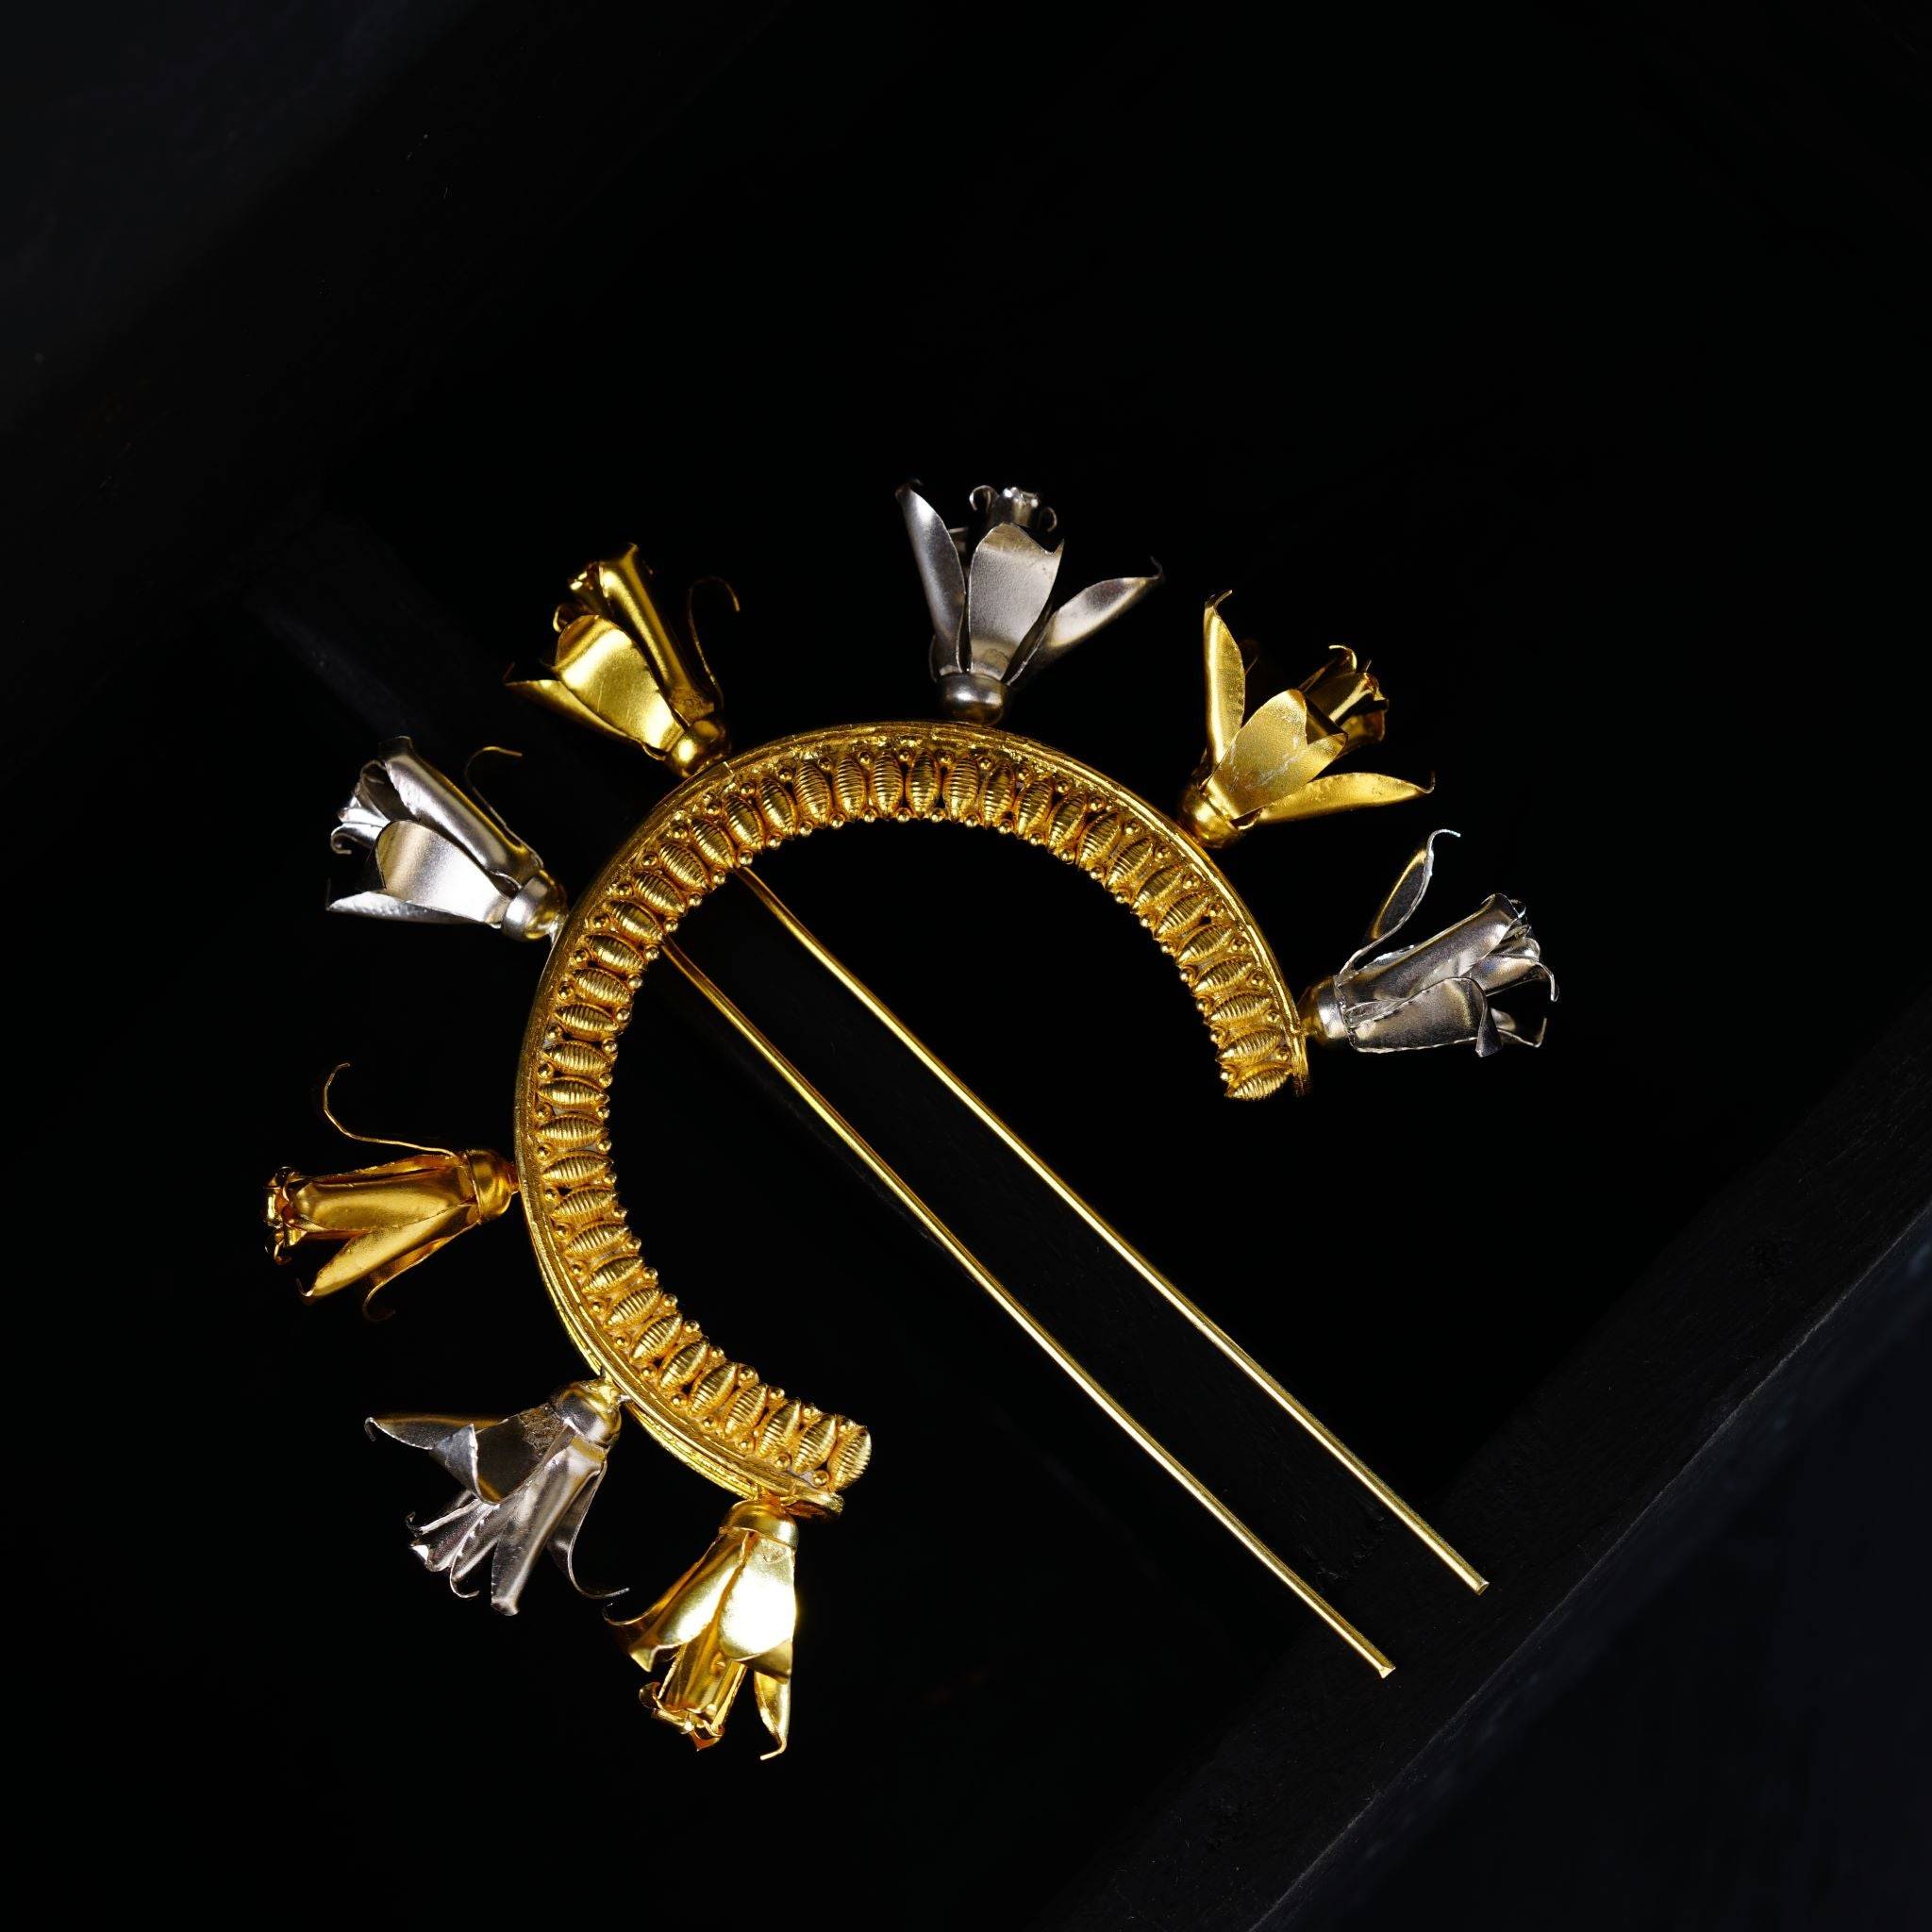 a gold brooch with spikes on it